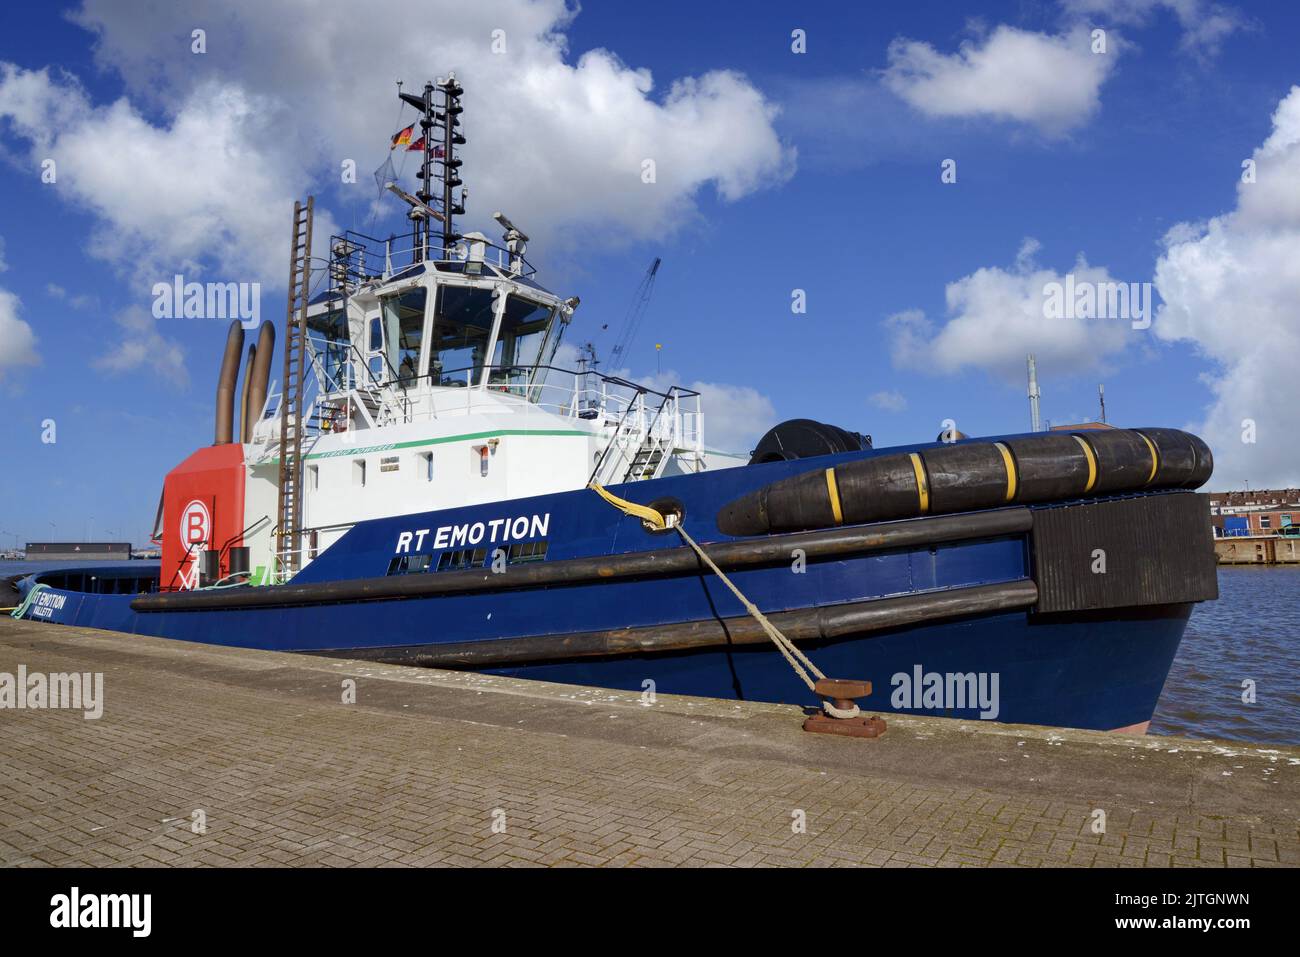 Tugboat RT Emotion in Bremerhaven, Germany, Bremerhaven Stock Photo